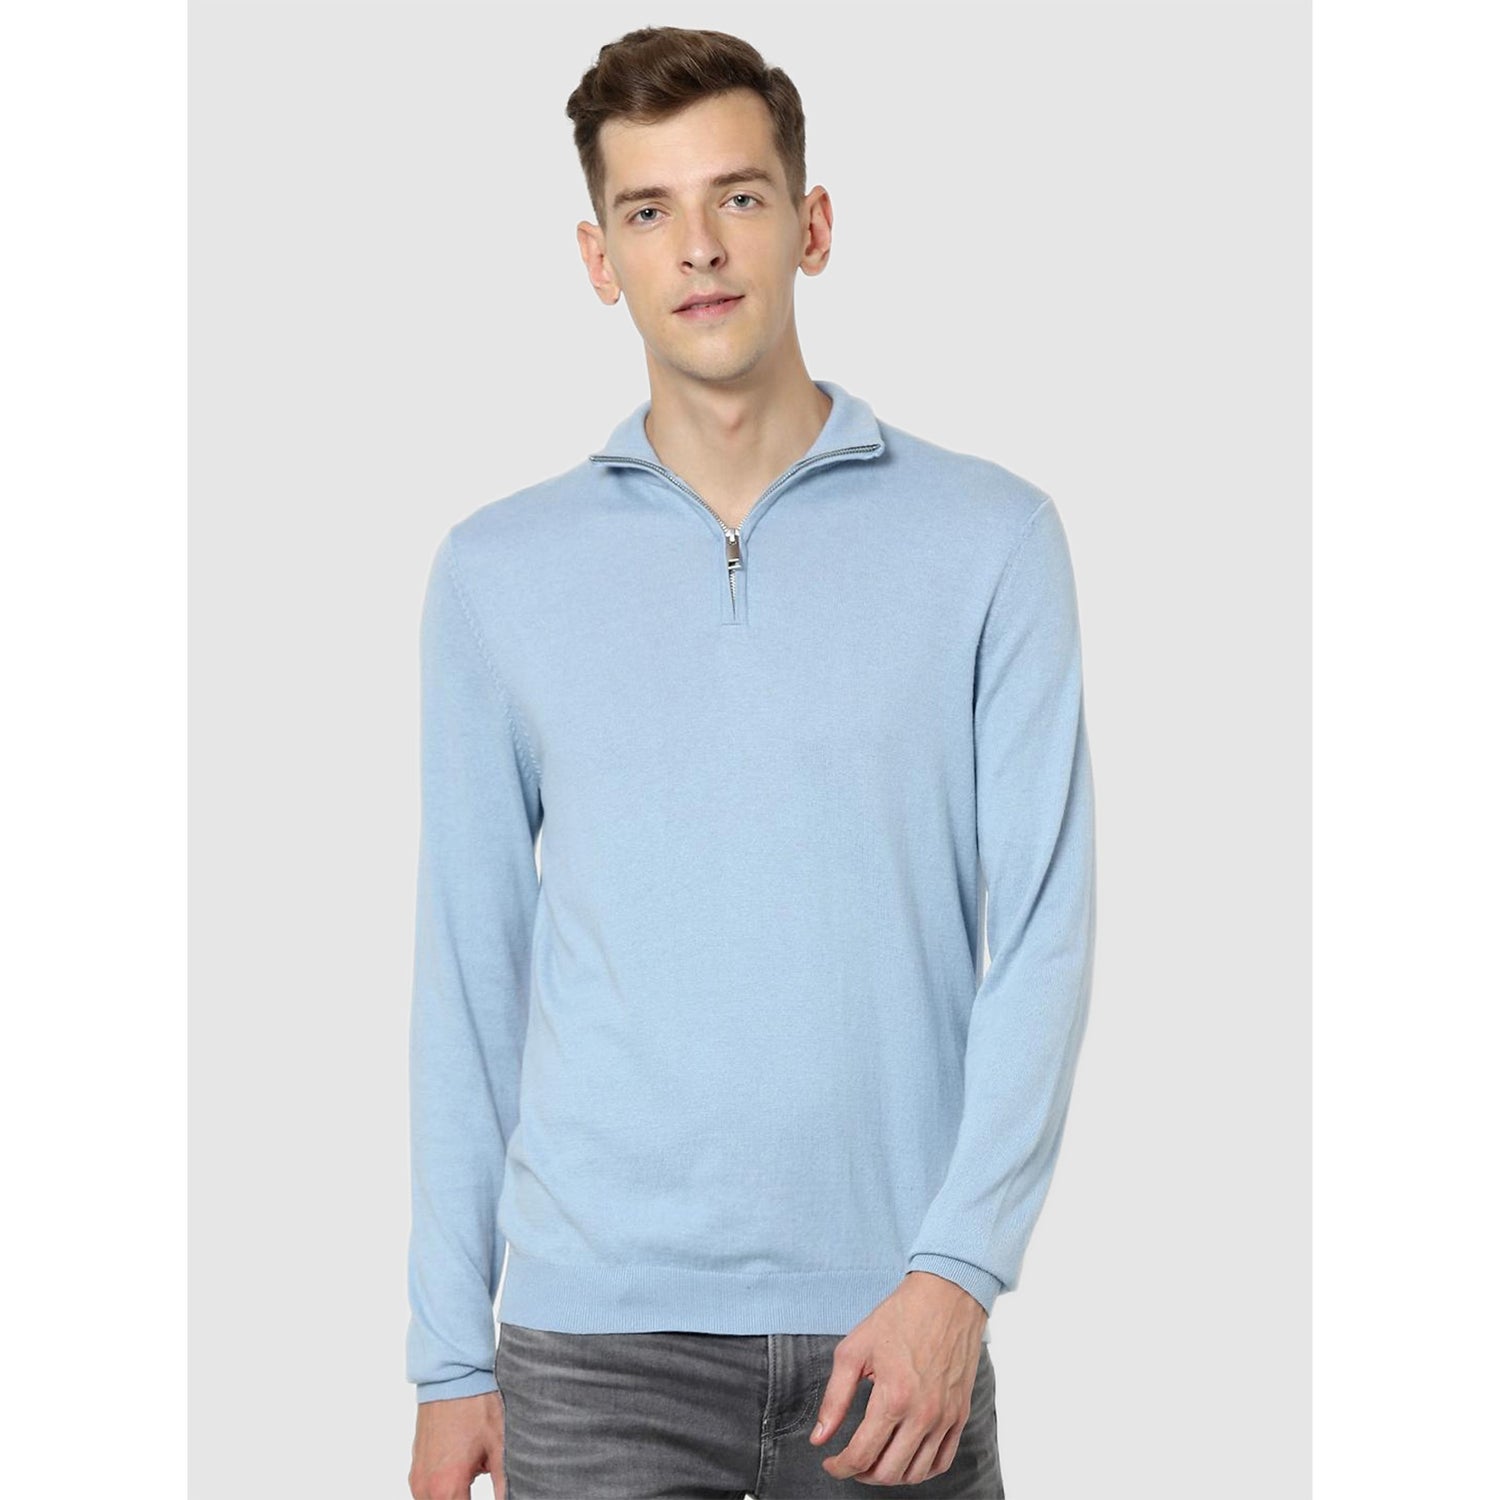 Blue Solid Pullover Sweater (CELIMIN)